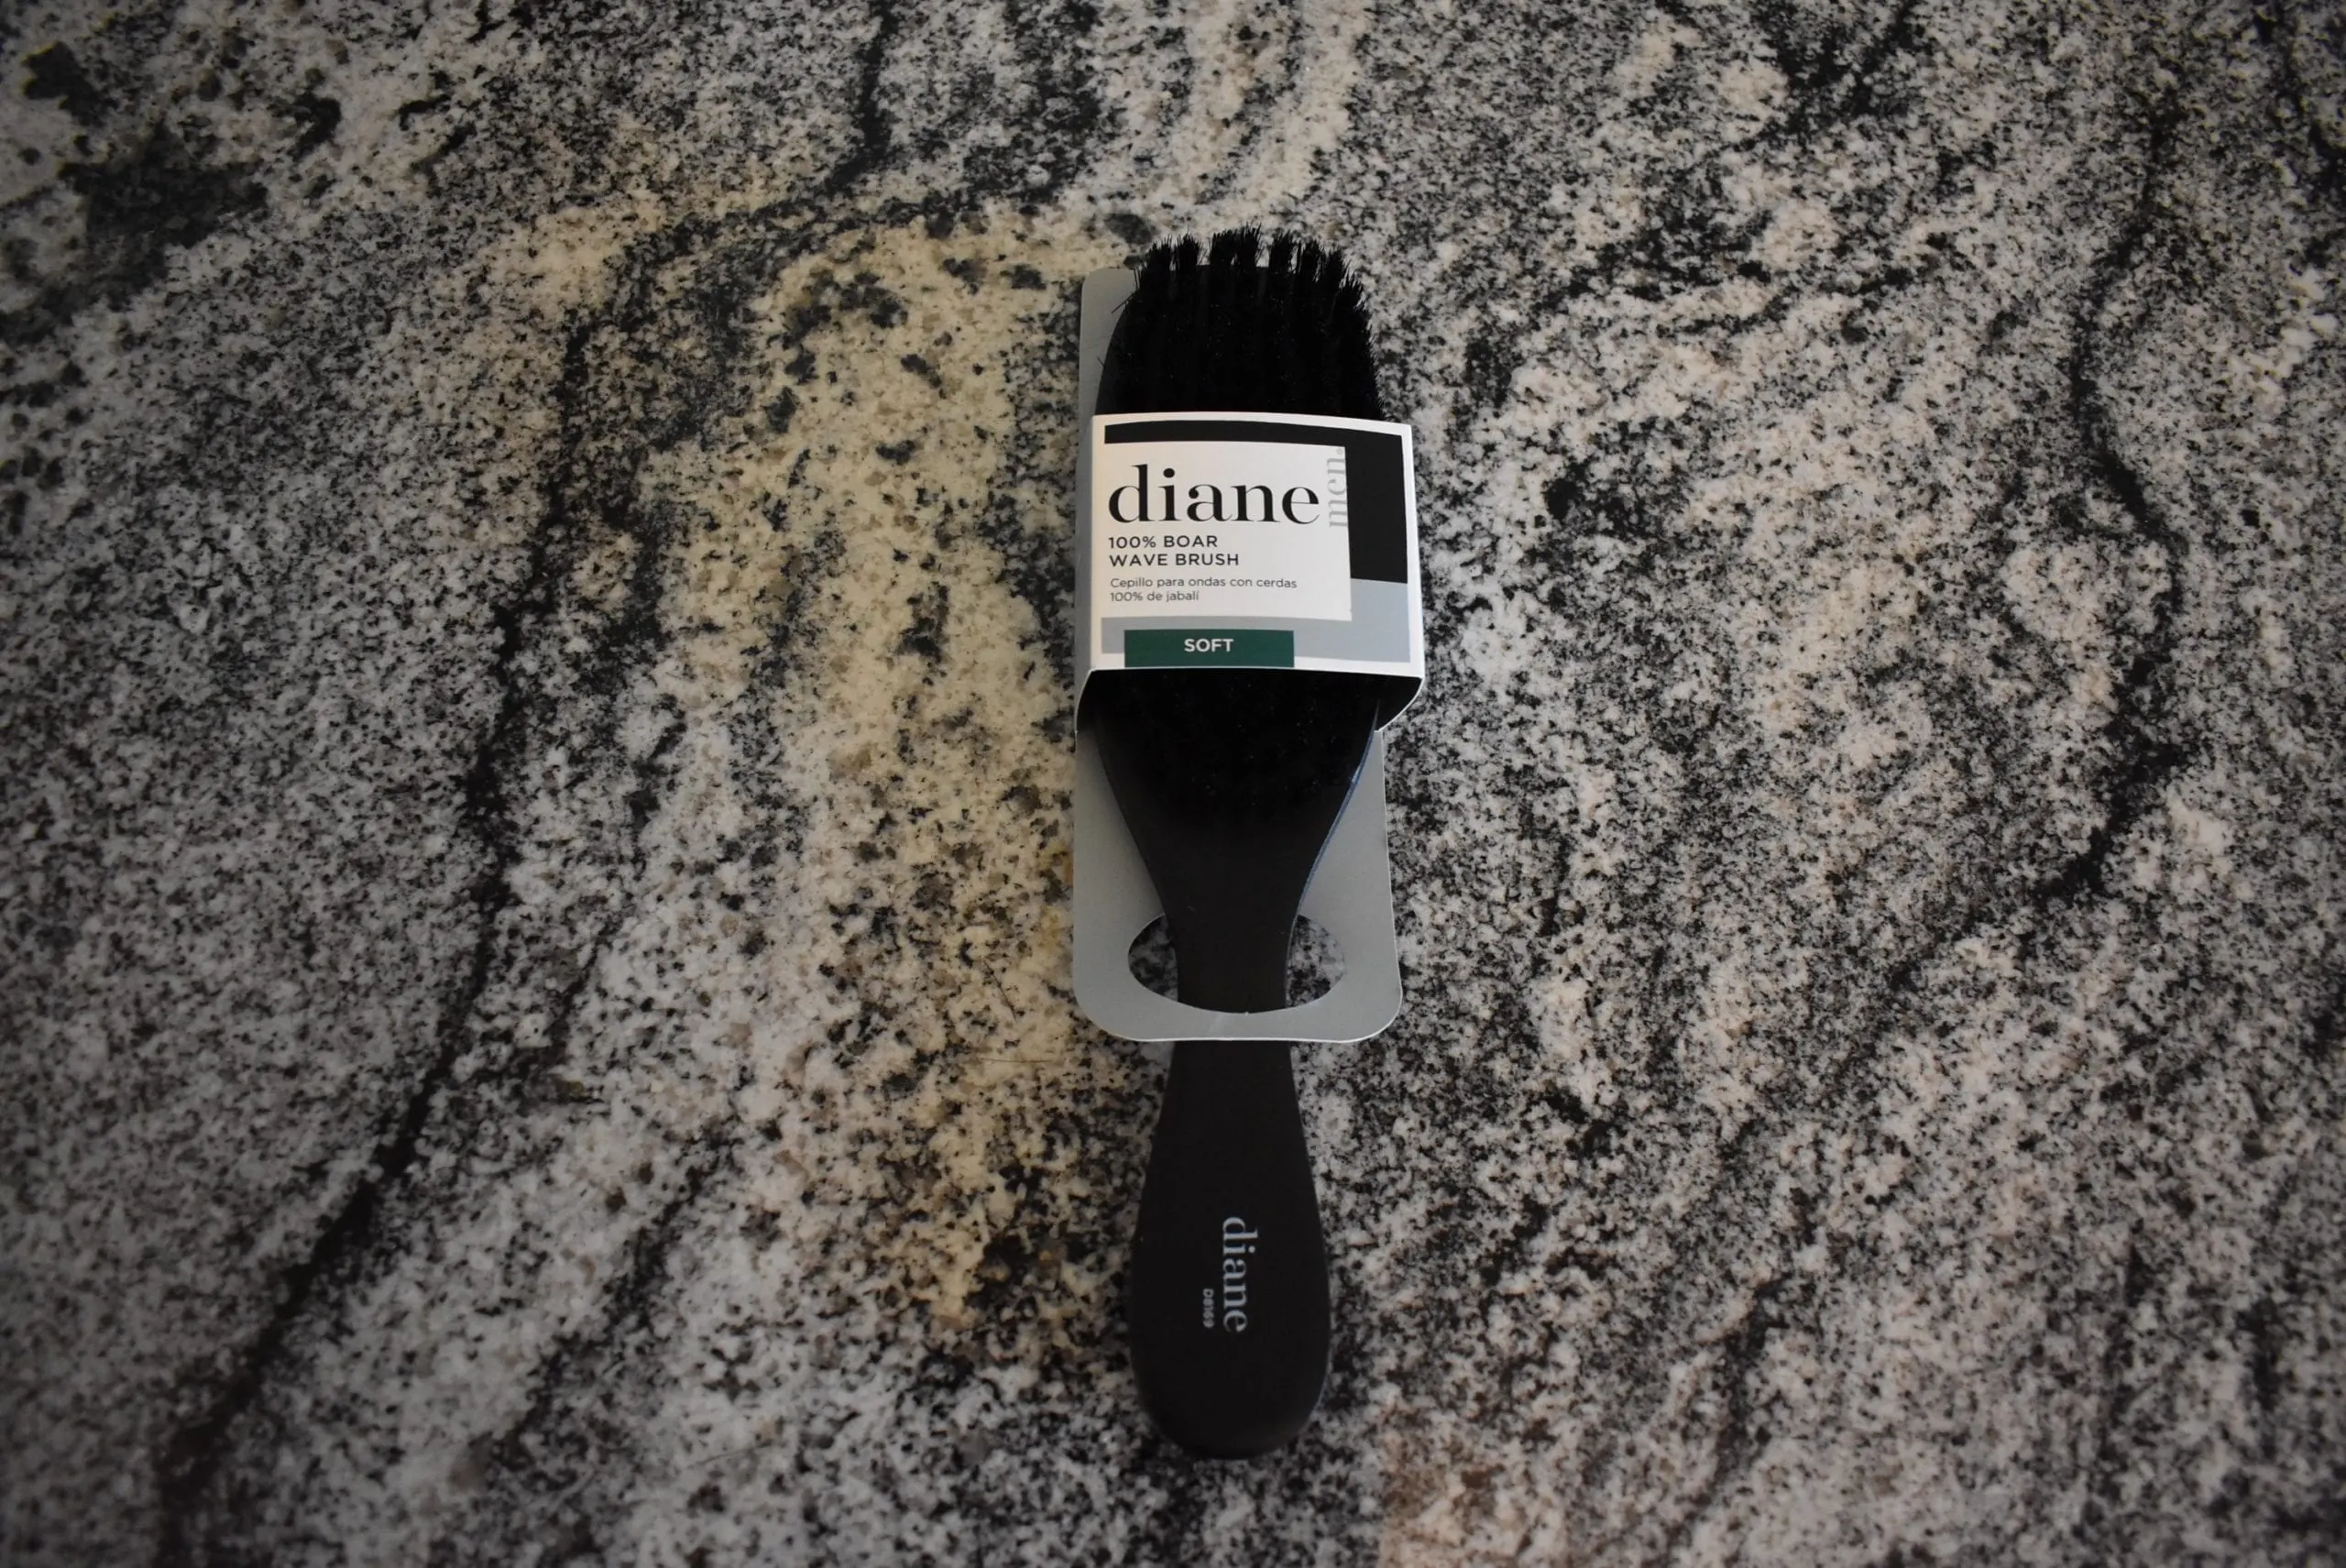 The diane boar brush (one of the best hair brushes) sitting on a counter before being unwrapped for a review